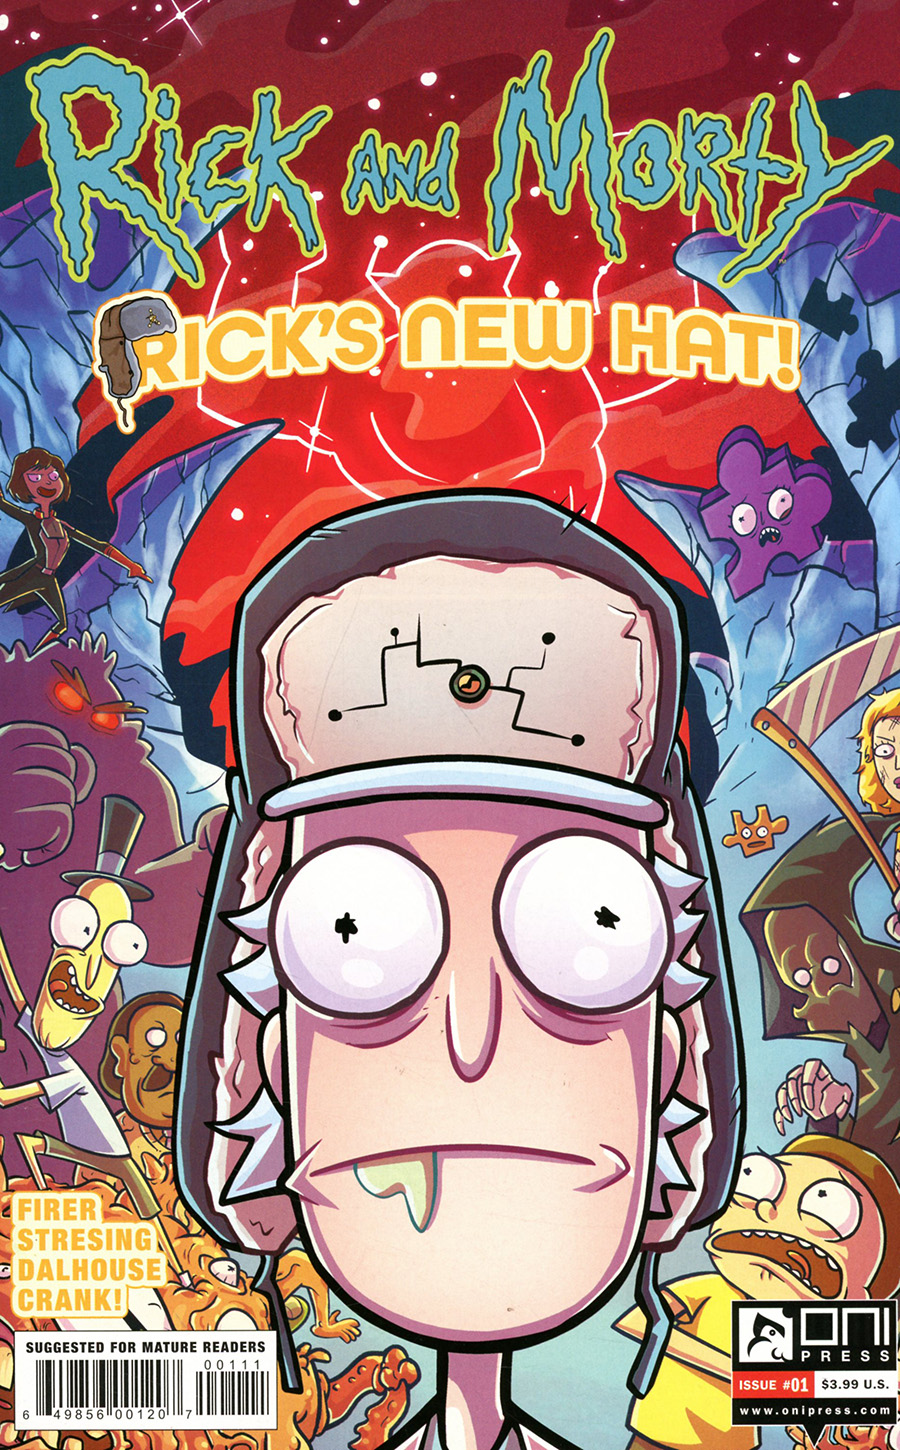 Rick And Morty Ricks New Hat #1 Cover A Regular Fred C Stresing Cover